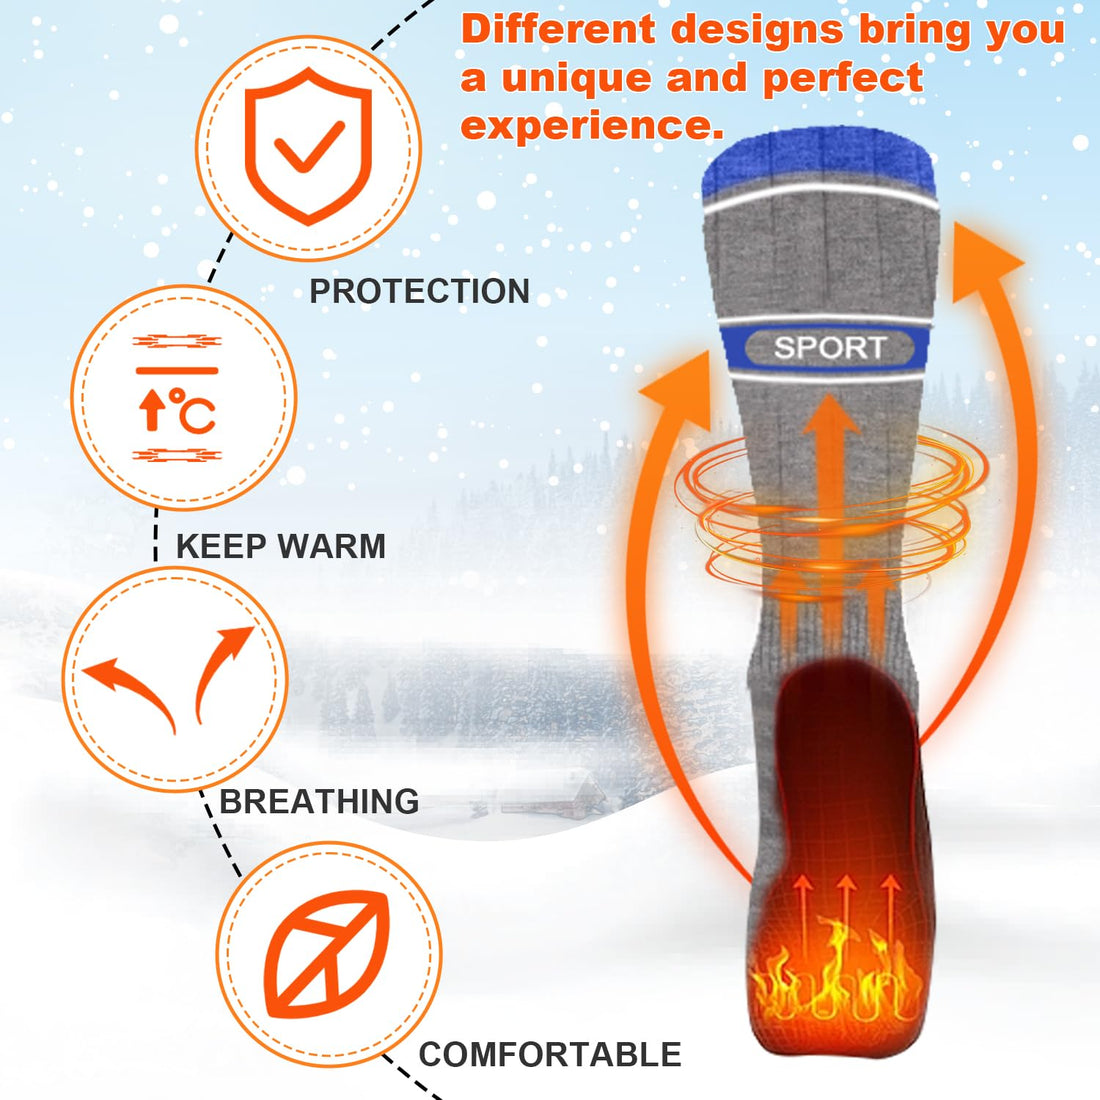 Heated Socks for Men Women,5000mAh Rechargeable Foot Warmer Electric Heating Socks with 3 Heating Settings & App Remote Control Thermal Electric Socks,Warm Socks for Hunting Skiing Camping Hiking